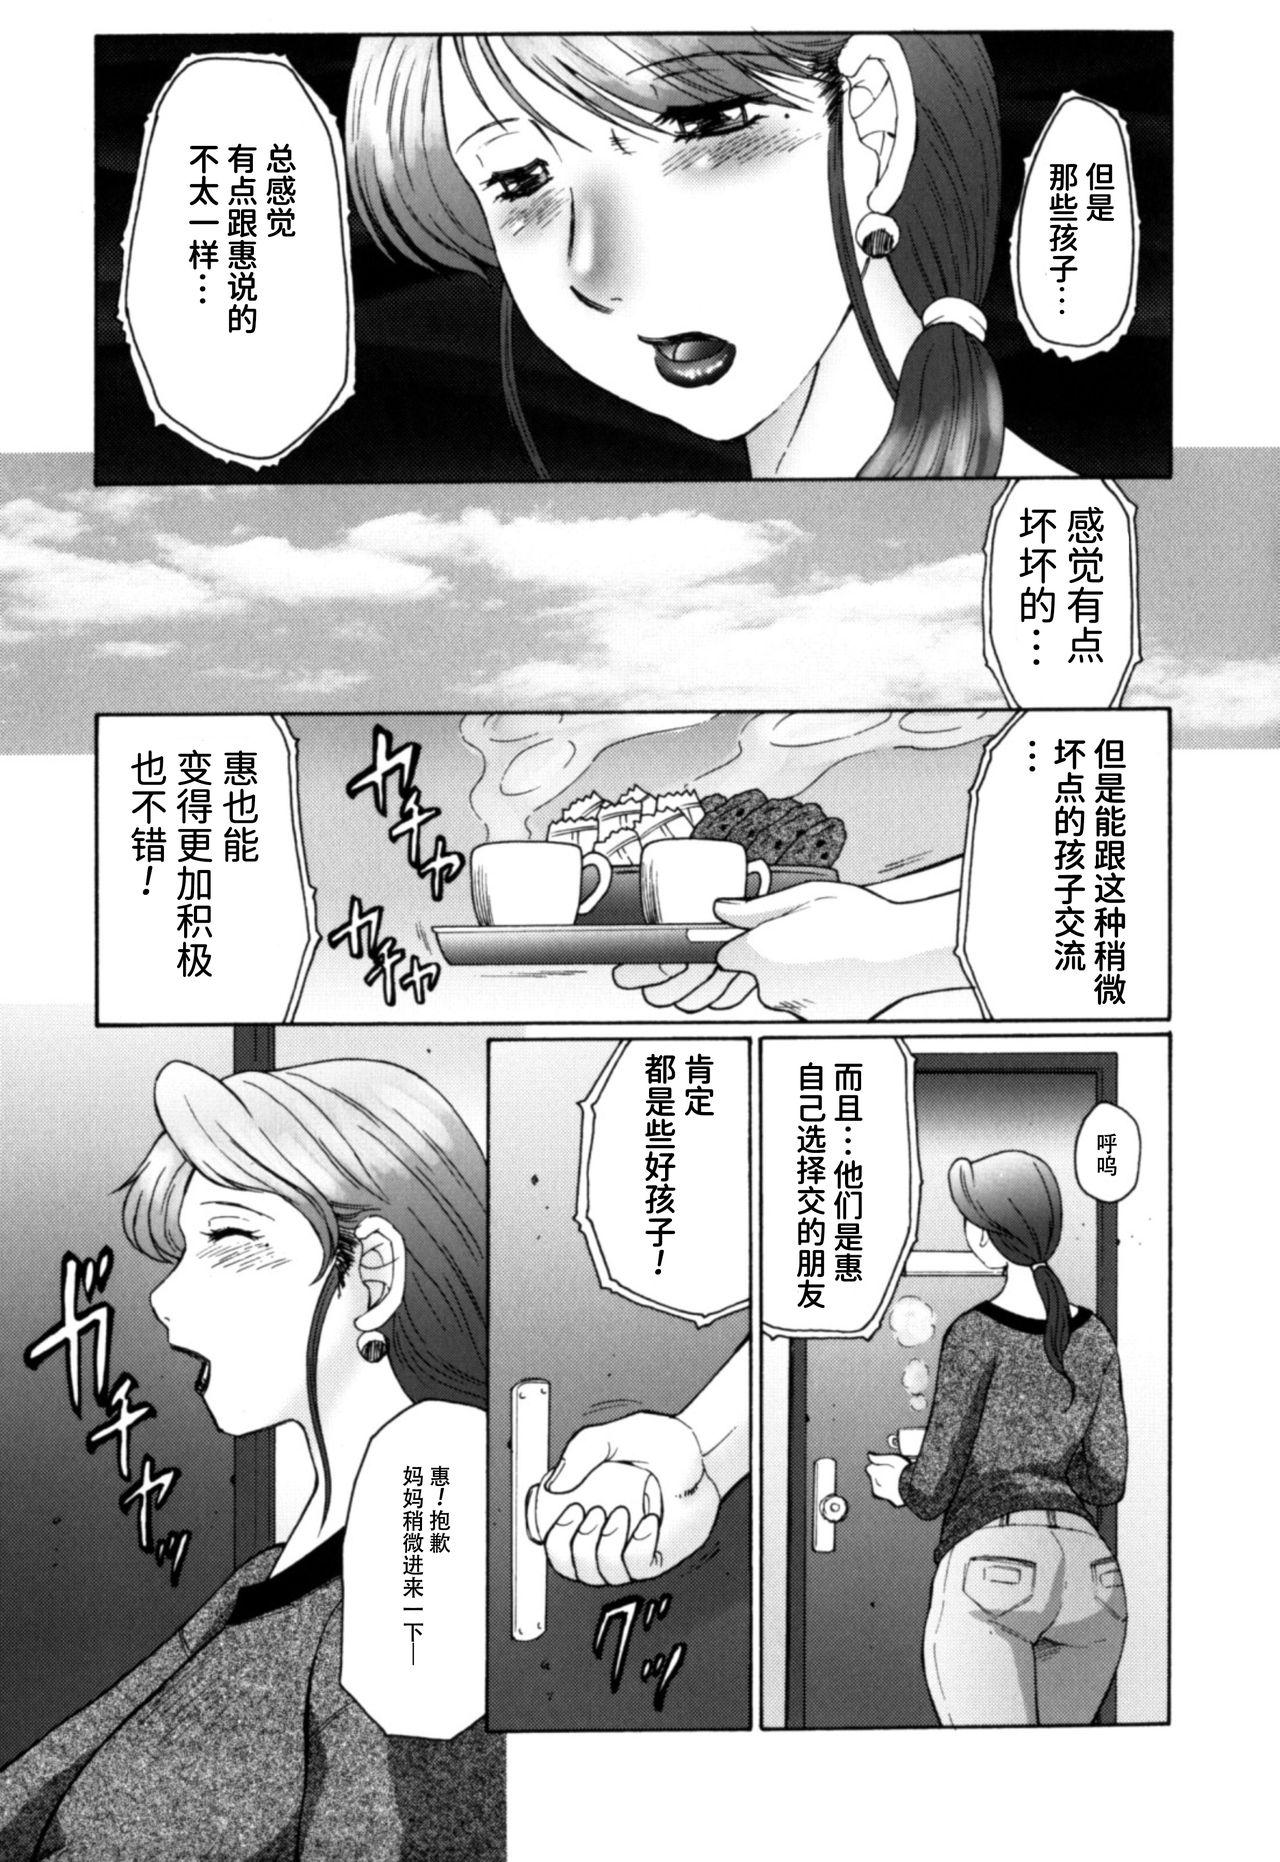 Humiliation Pov [Fuusen Club] Haha Mamire Ch. 1 [Chinese]【不可视汉化】 Fucked - Page 6